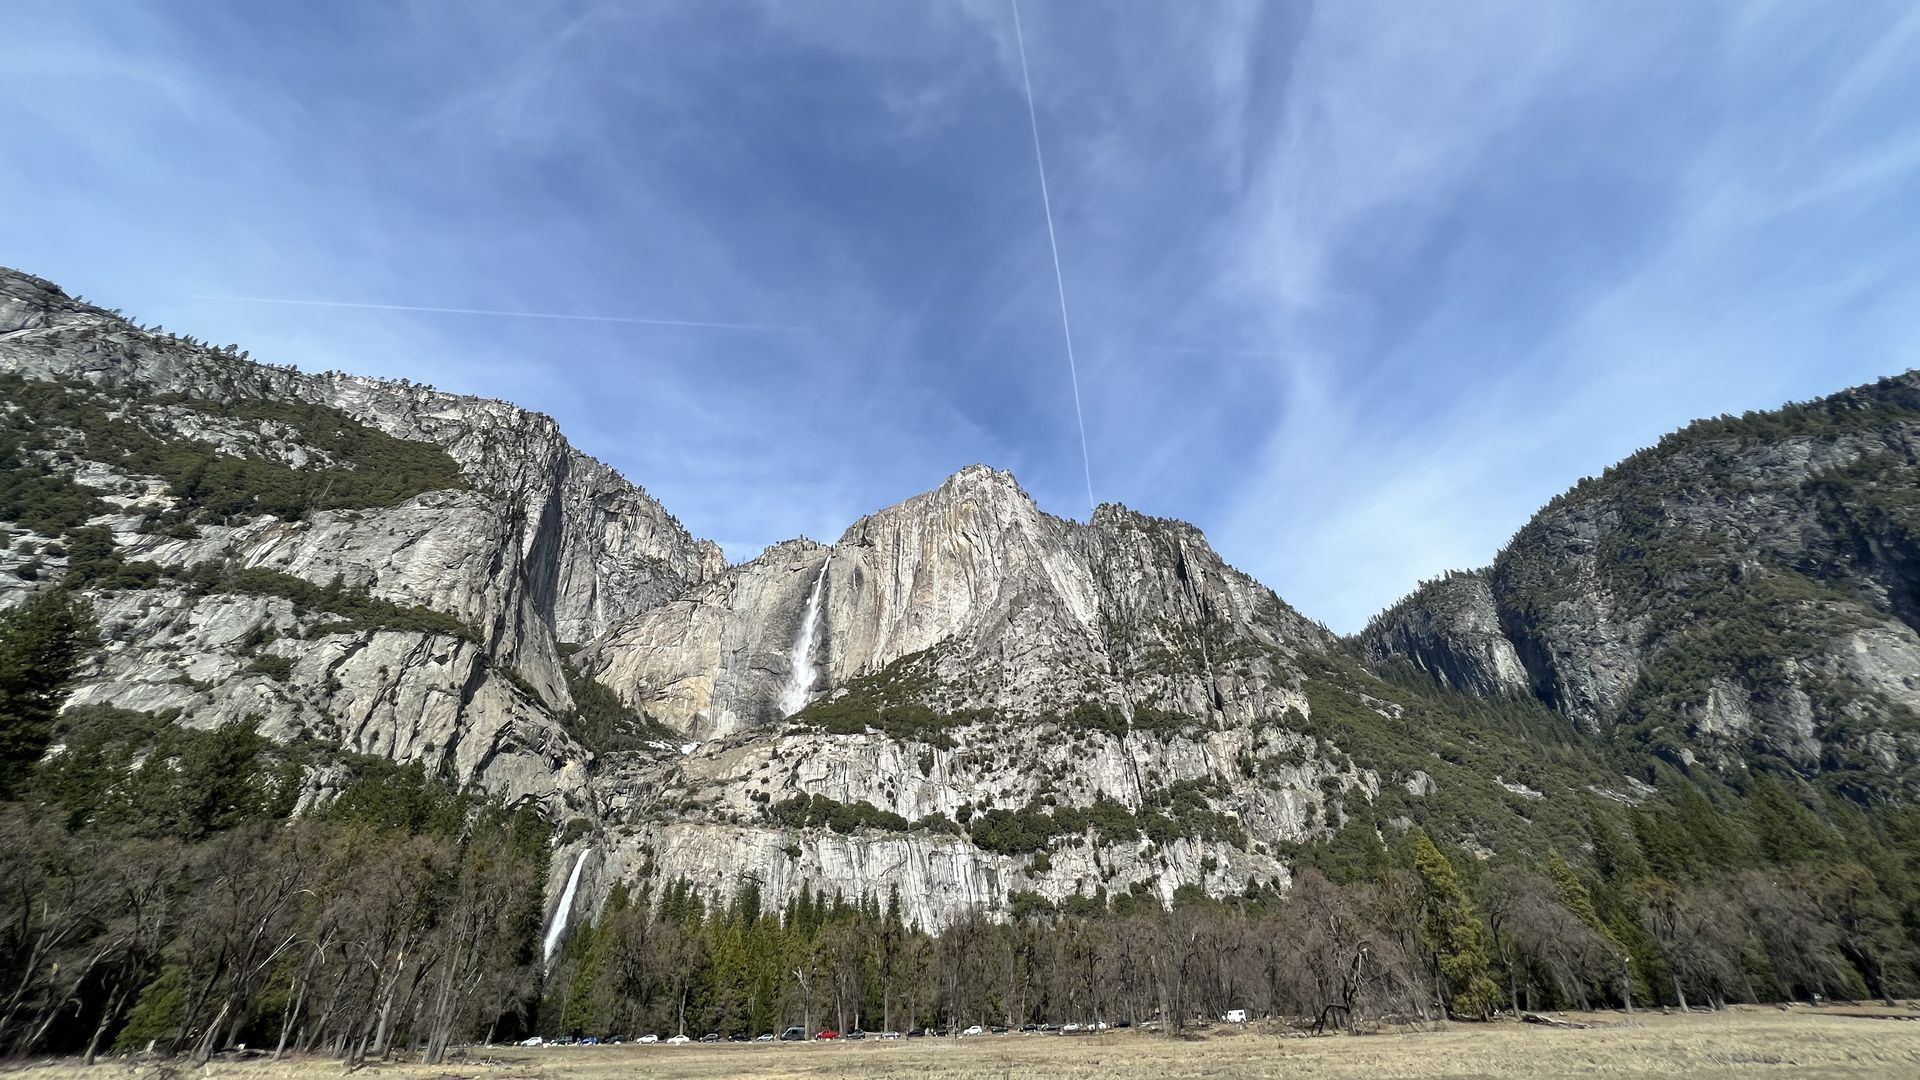 A wide image of Yosemite against a blue sky with clouds